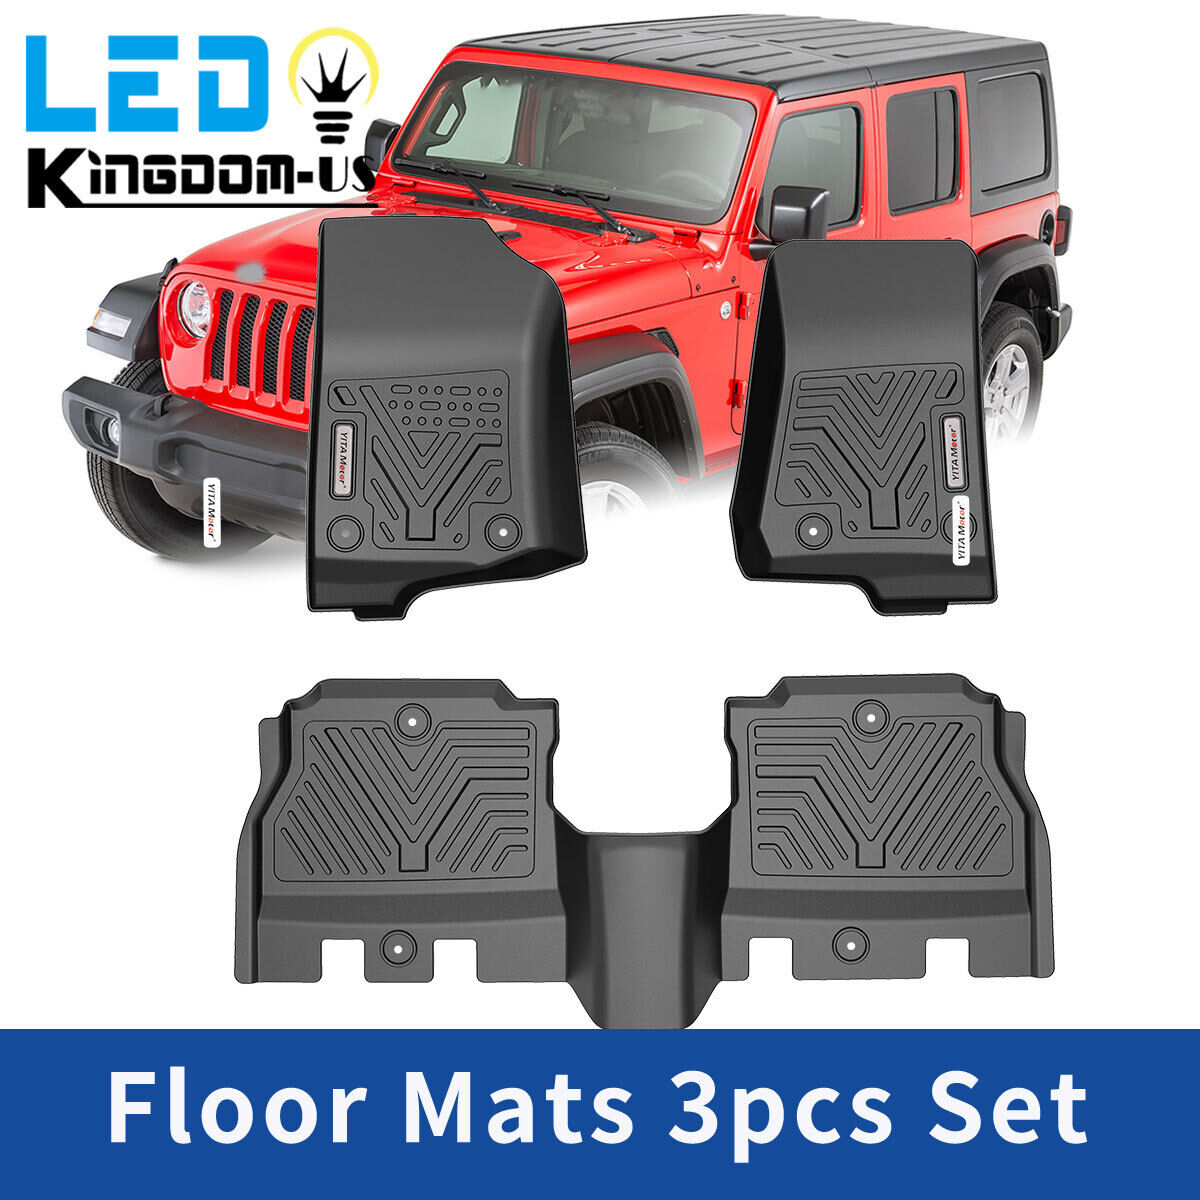 Need All-Weather Floor Mats for Your New SUV. Find the Best 2024 GMC Yukon XL Mats Here